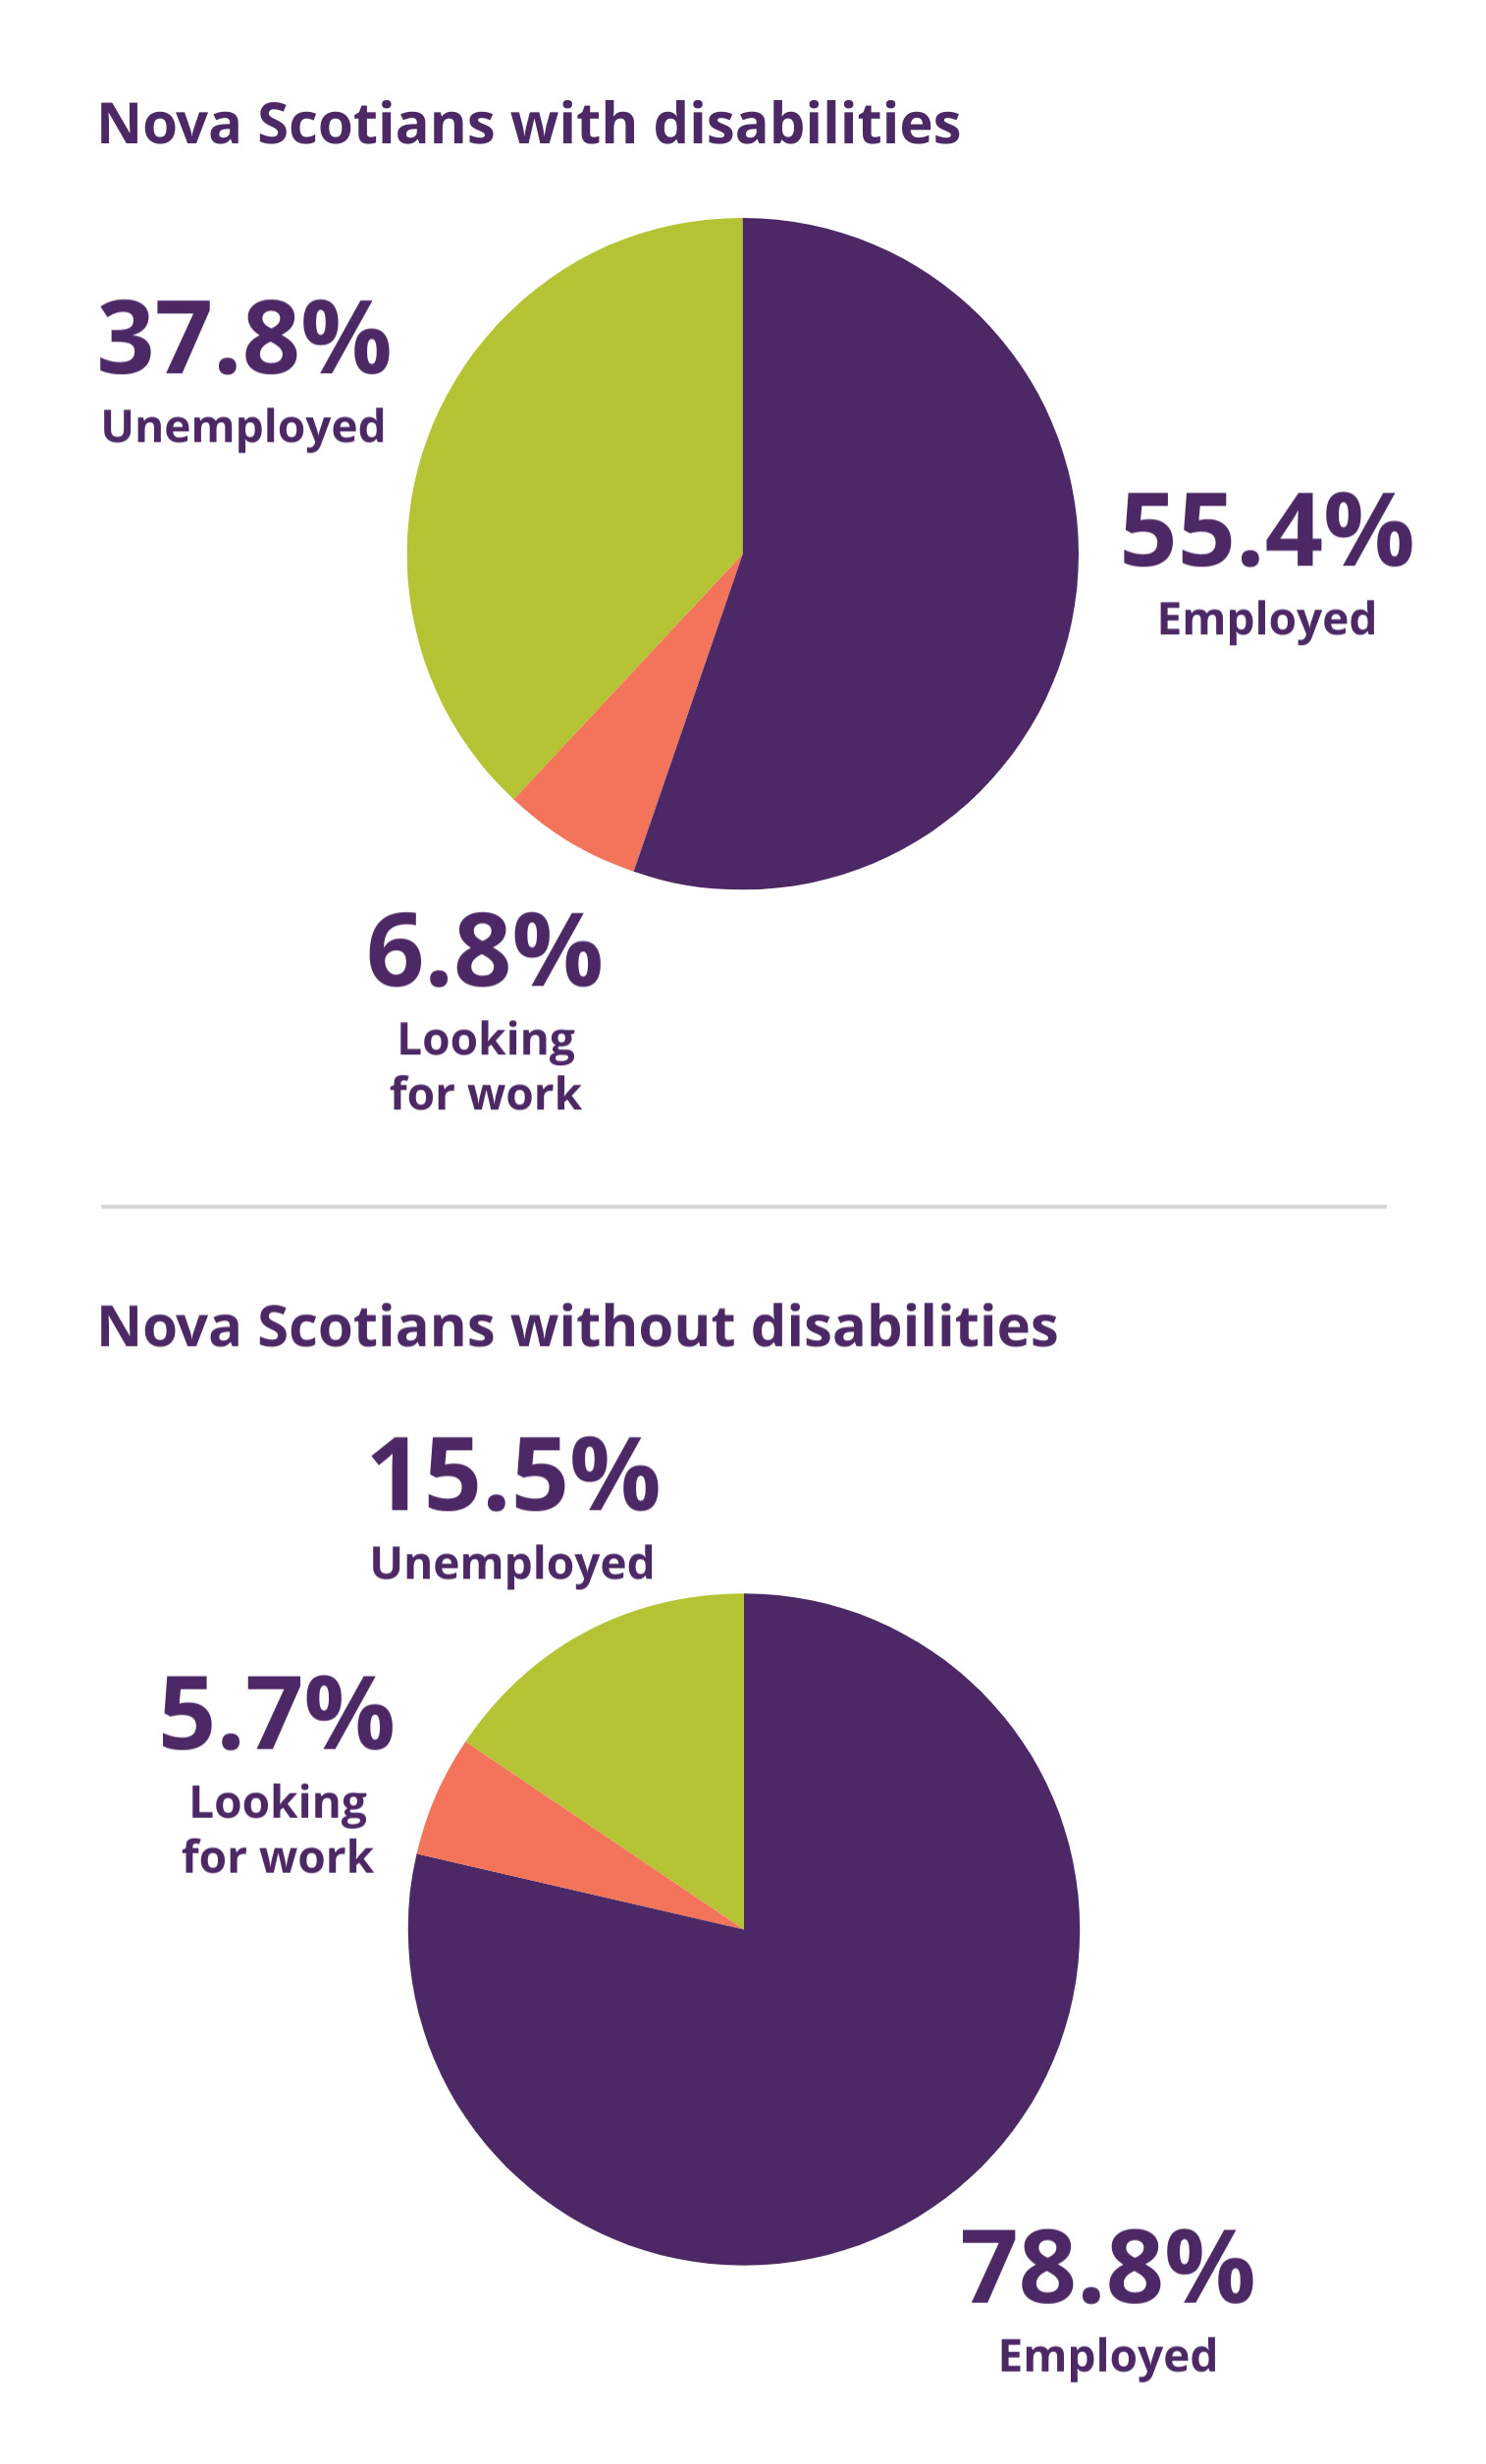 Two pie charts depicting the ratio of Nova Scotians with and without disabilities status within the labour market.